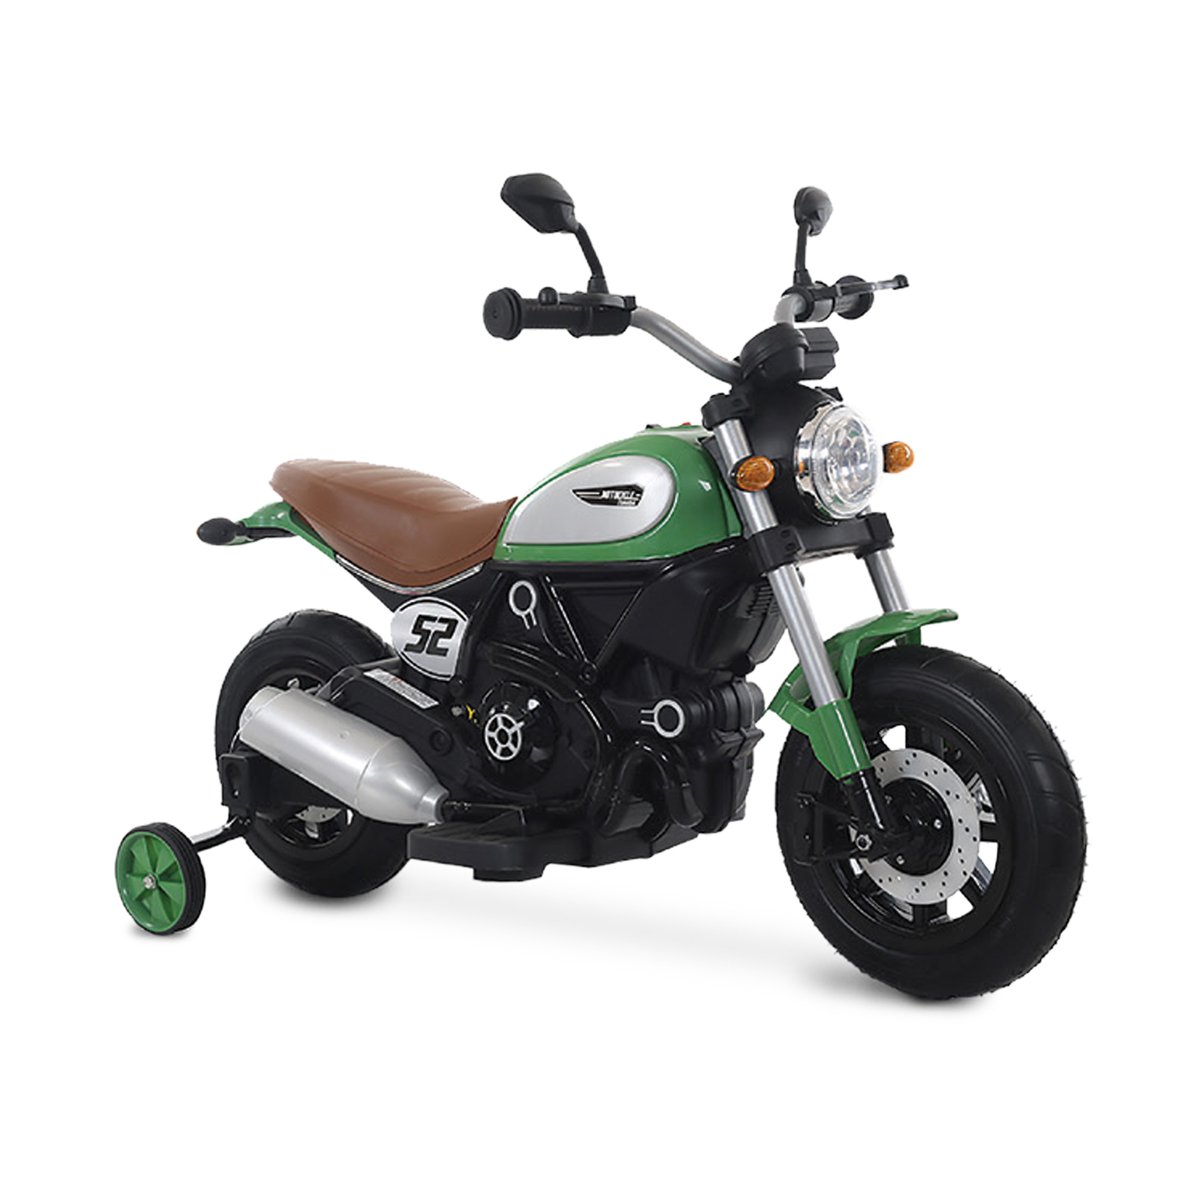 Skid Fusion Rechargeable Kid's Motor Bike Assorted QK-307 